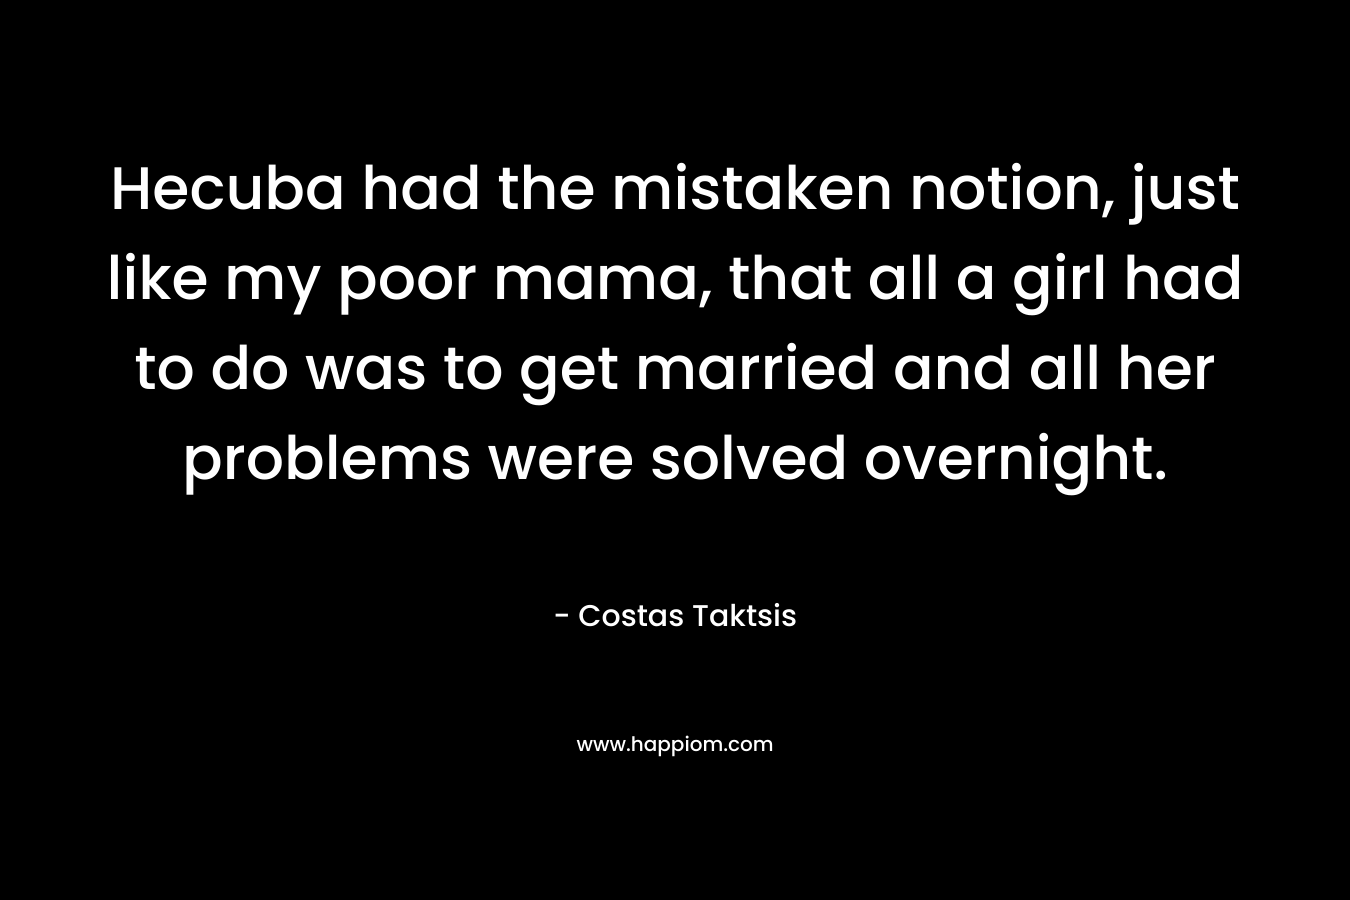 Hecuba had the mistaken notion, just like my poor mama, that all a girl had to do was to get married and all her problems were solved overnight. – Costas Taktsis